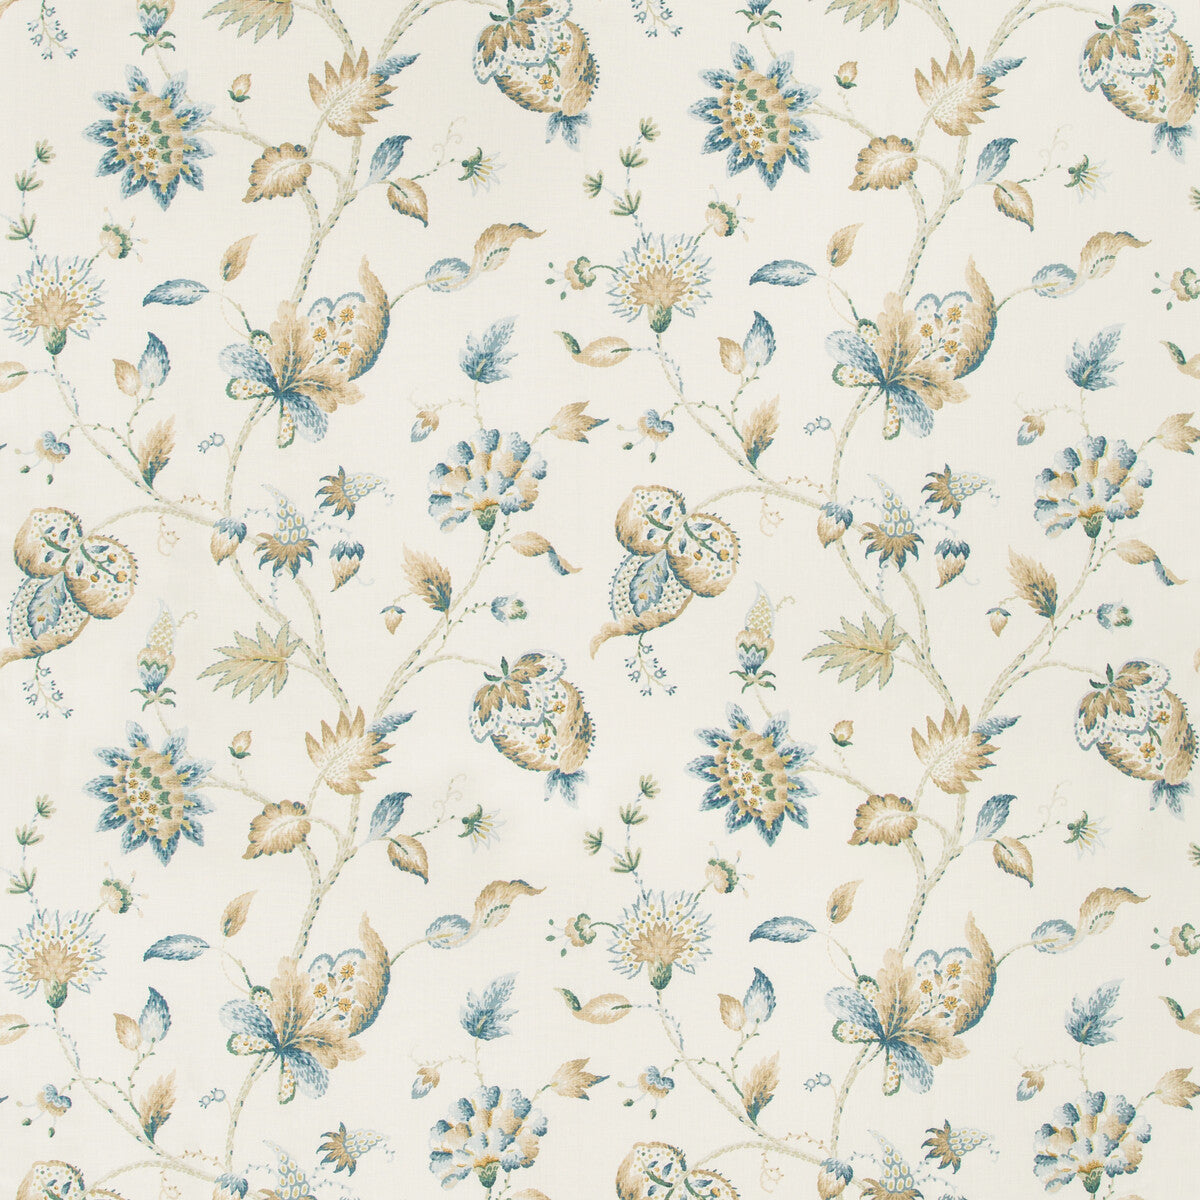 Hollin Print fabric in mineral color - pattern 2019105.165.0 - by Lee Jofa in the Manor House collection